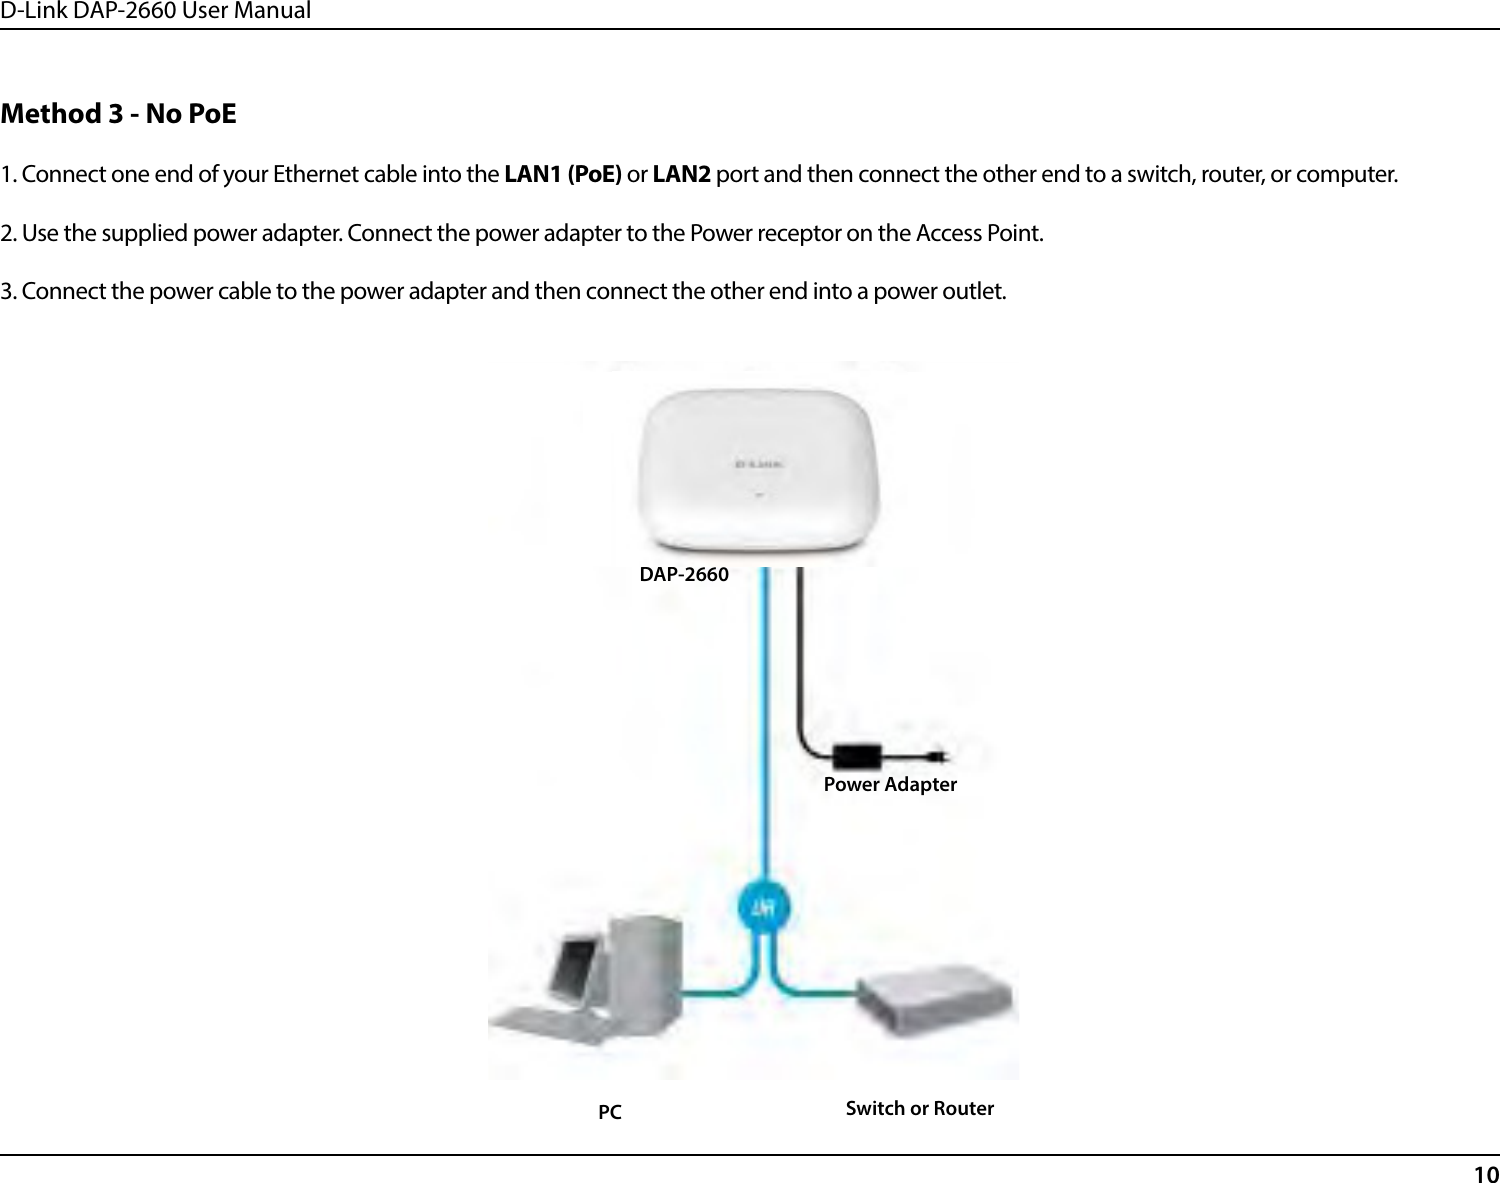 D-Link DAP-2660 User Manual10Method 3 - No PoE1. Connect one end of your Ethernet cable into the LAN1 (PoE) or LAN2 port and then connect the other end to a switch, router, or computer.2. Use the supplied power adapter. Connect the power adapter to the Power receptor on the Access Point.3. Connect the power cable to the power adapter and then connect the other end into a power outlet.DAP-2660Switch or RouterPCPower Adapter